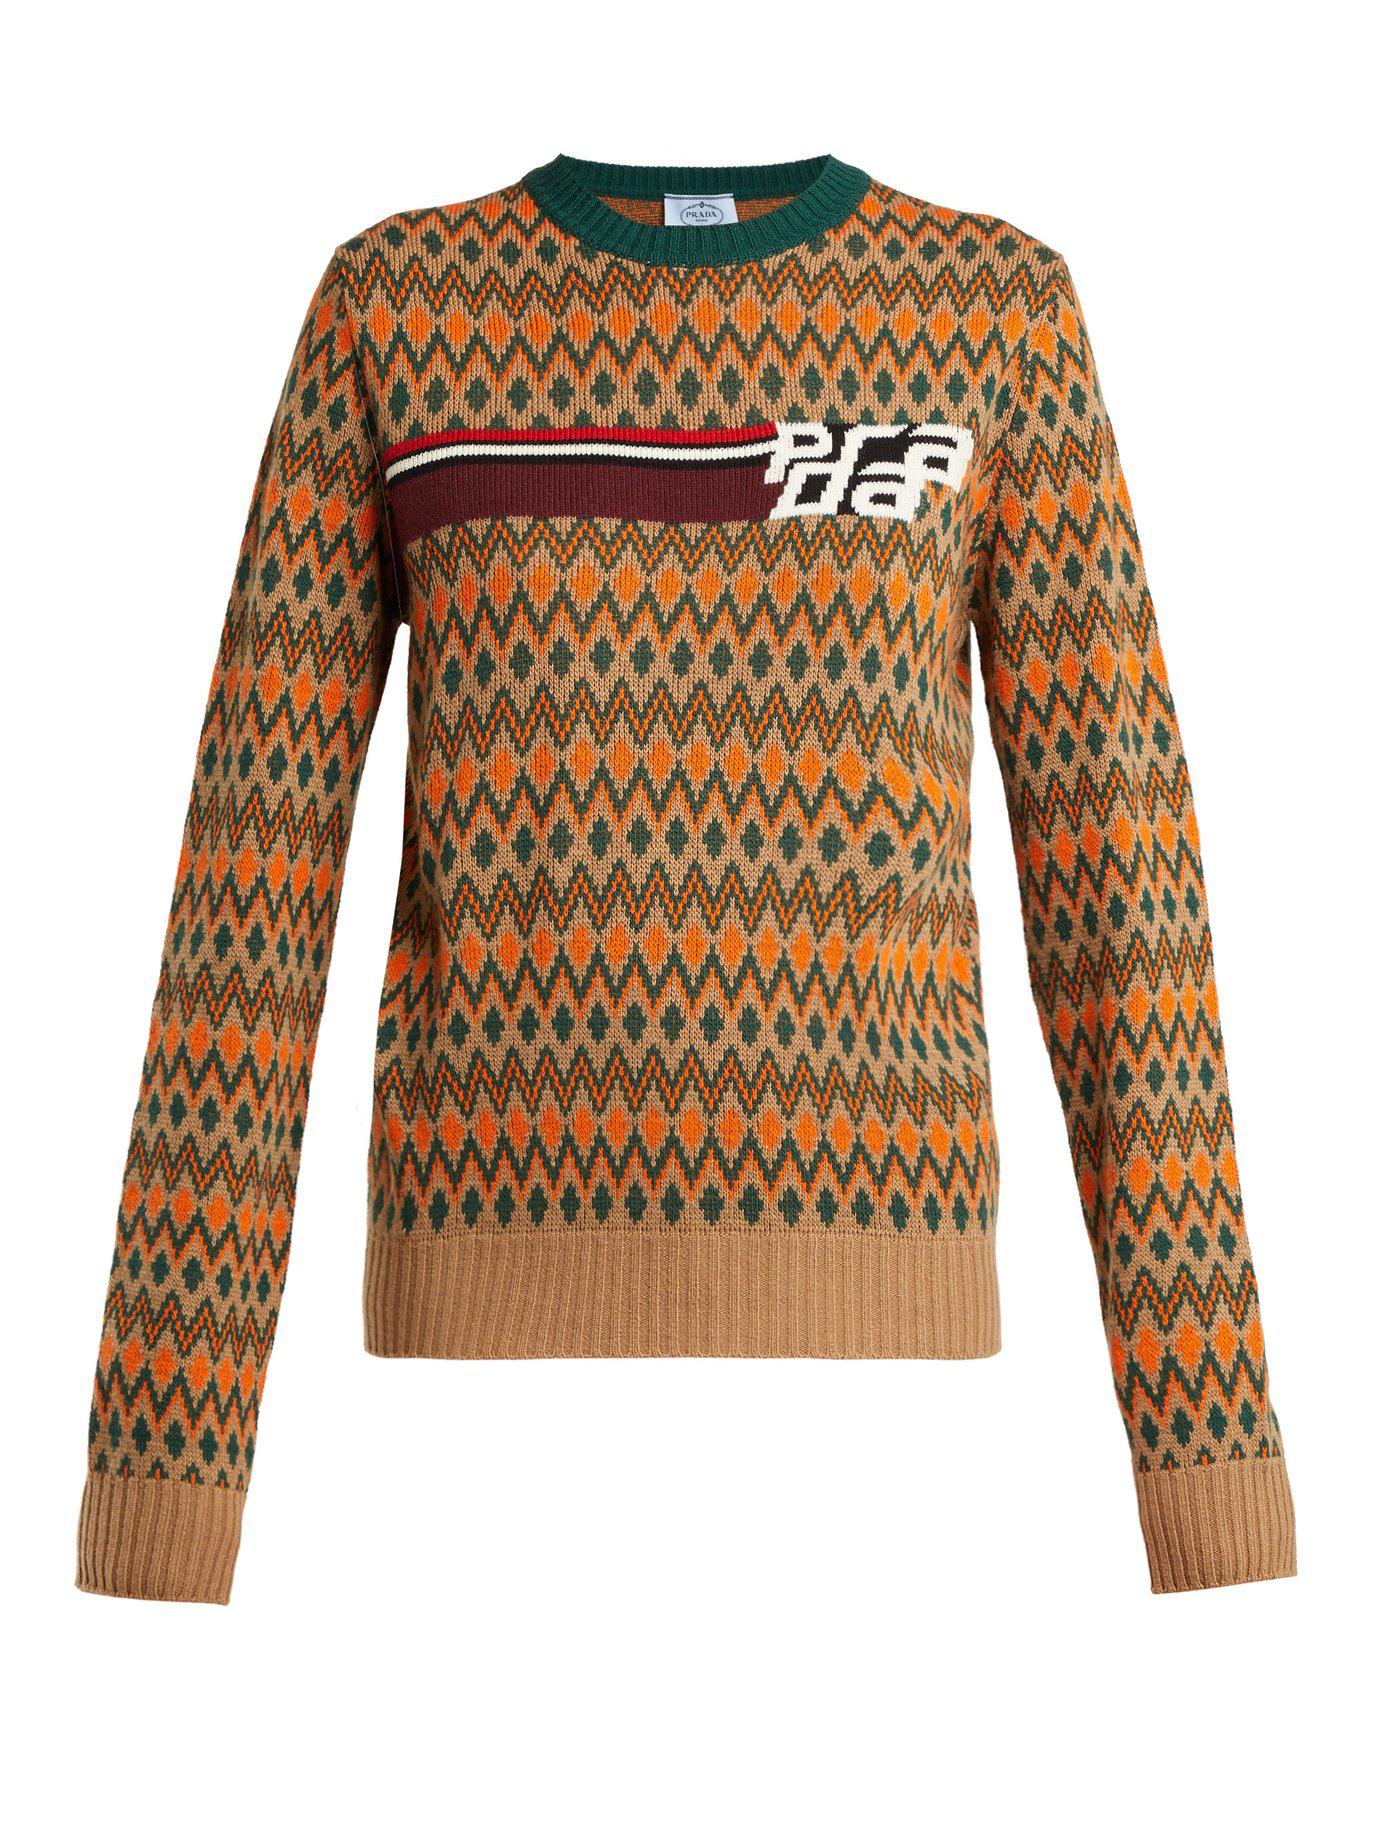 Prada Cashmere And Wool Sweater in Brown | Lyst